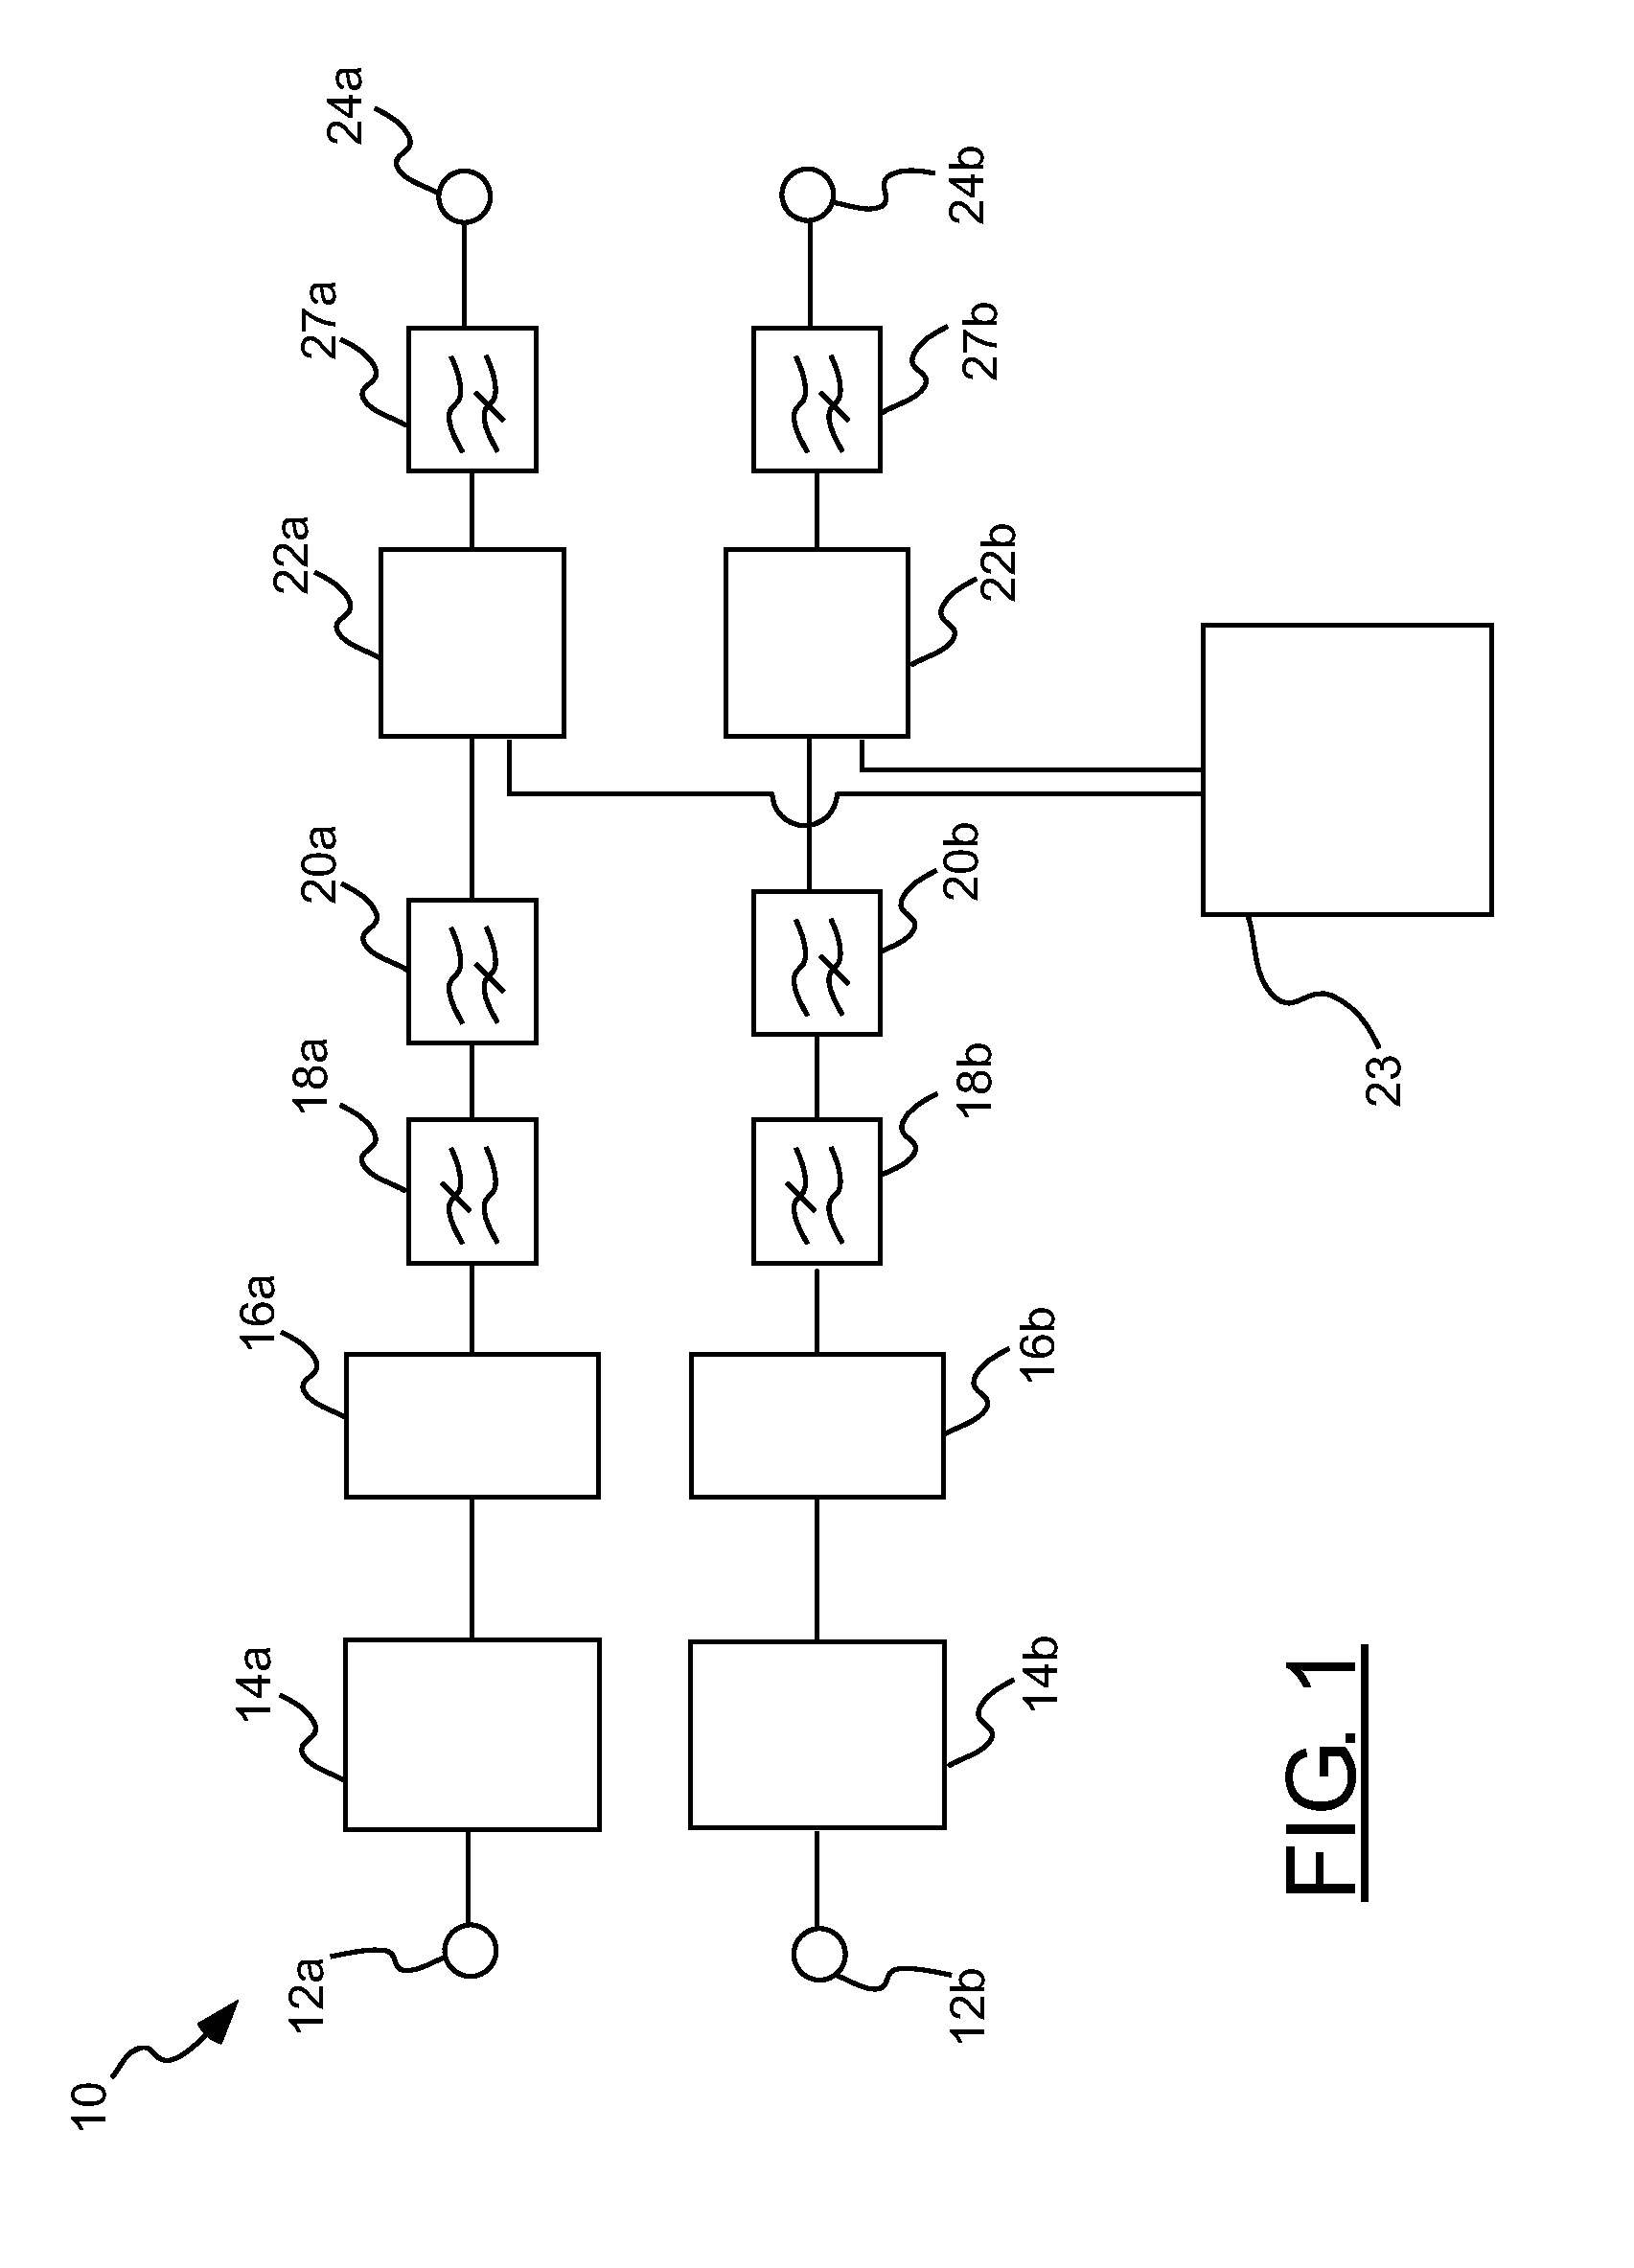 Low profile parametric transducers and related methods